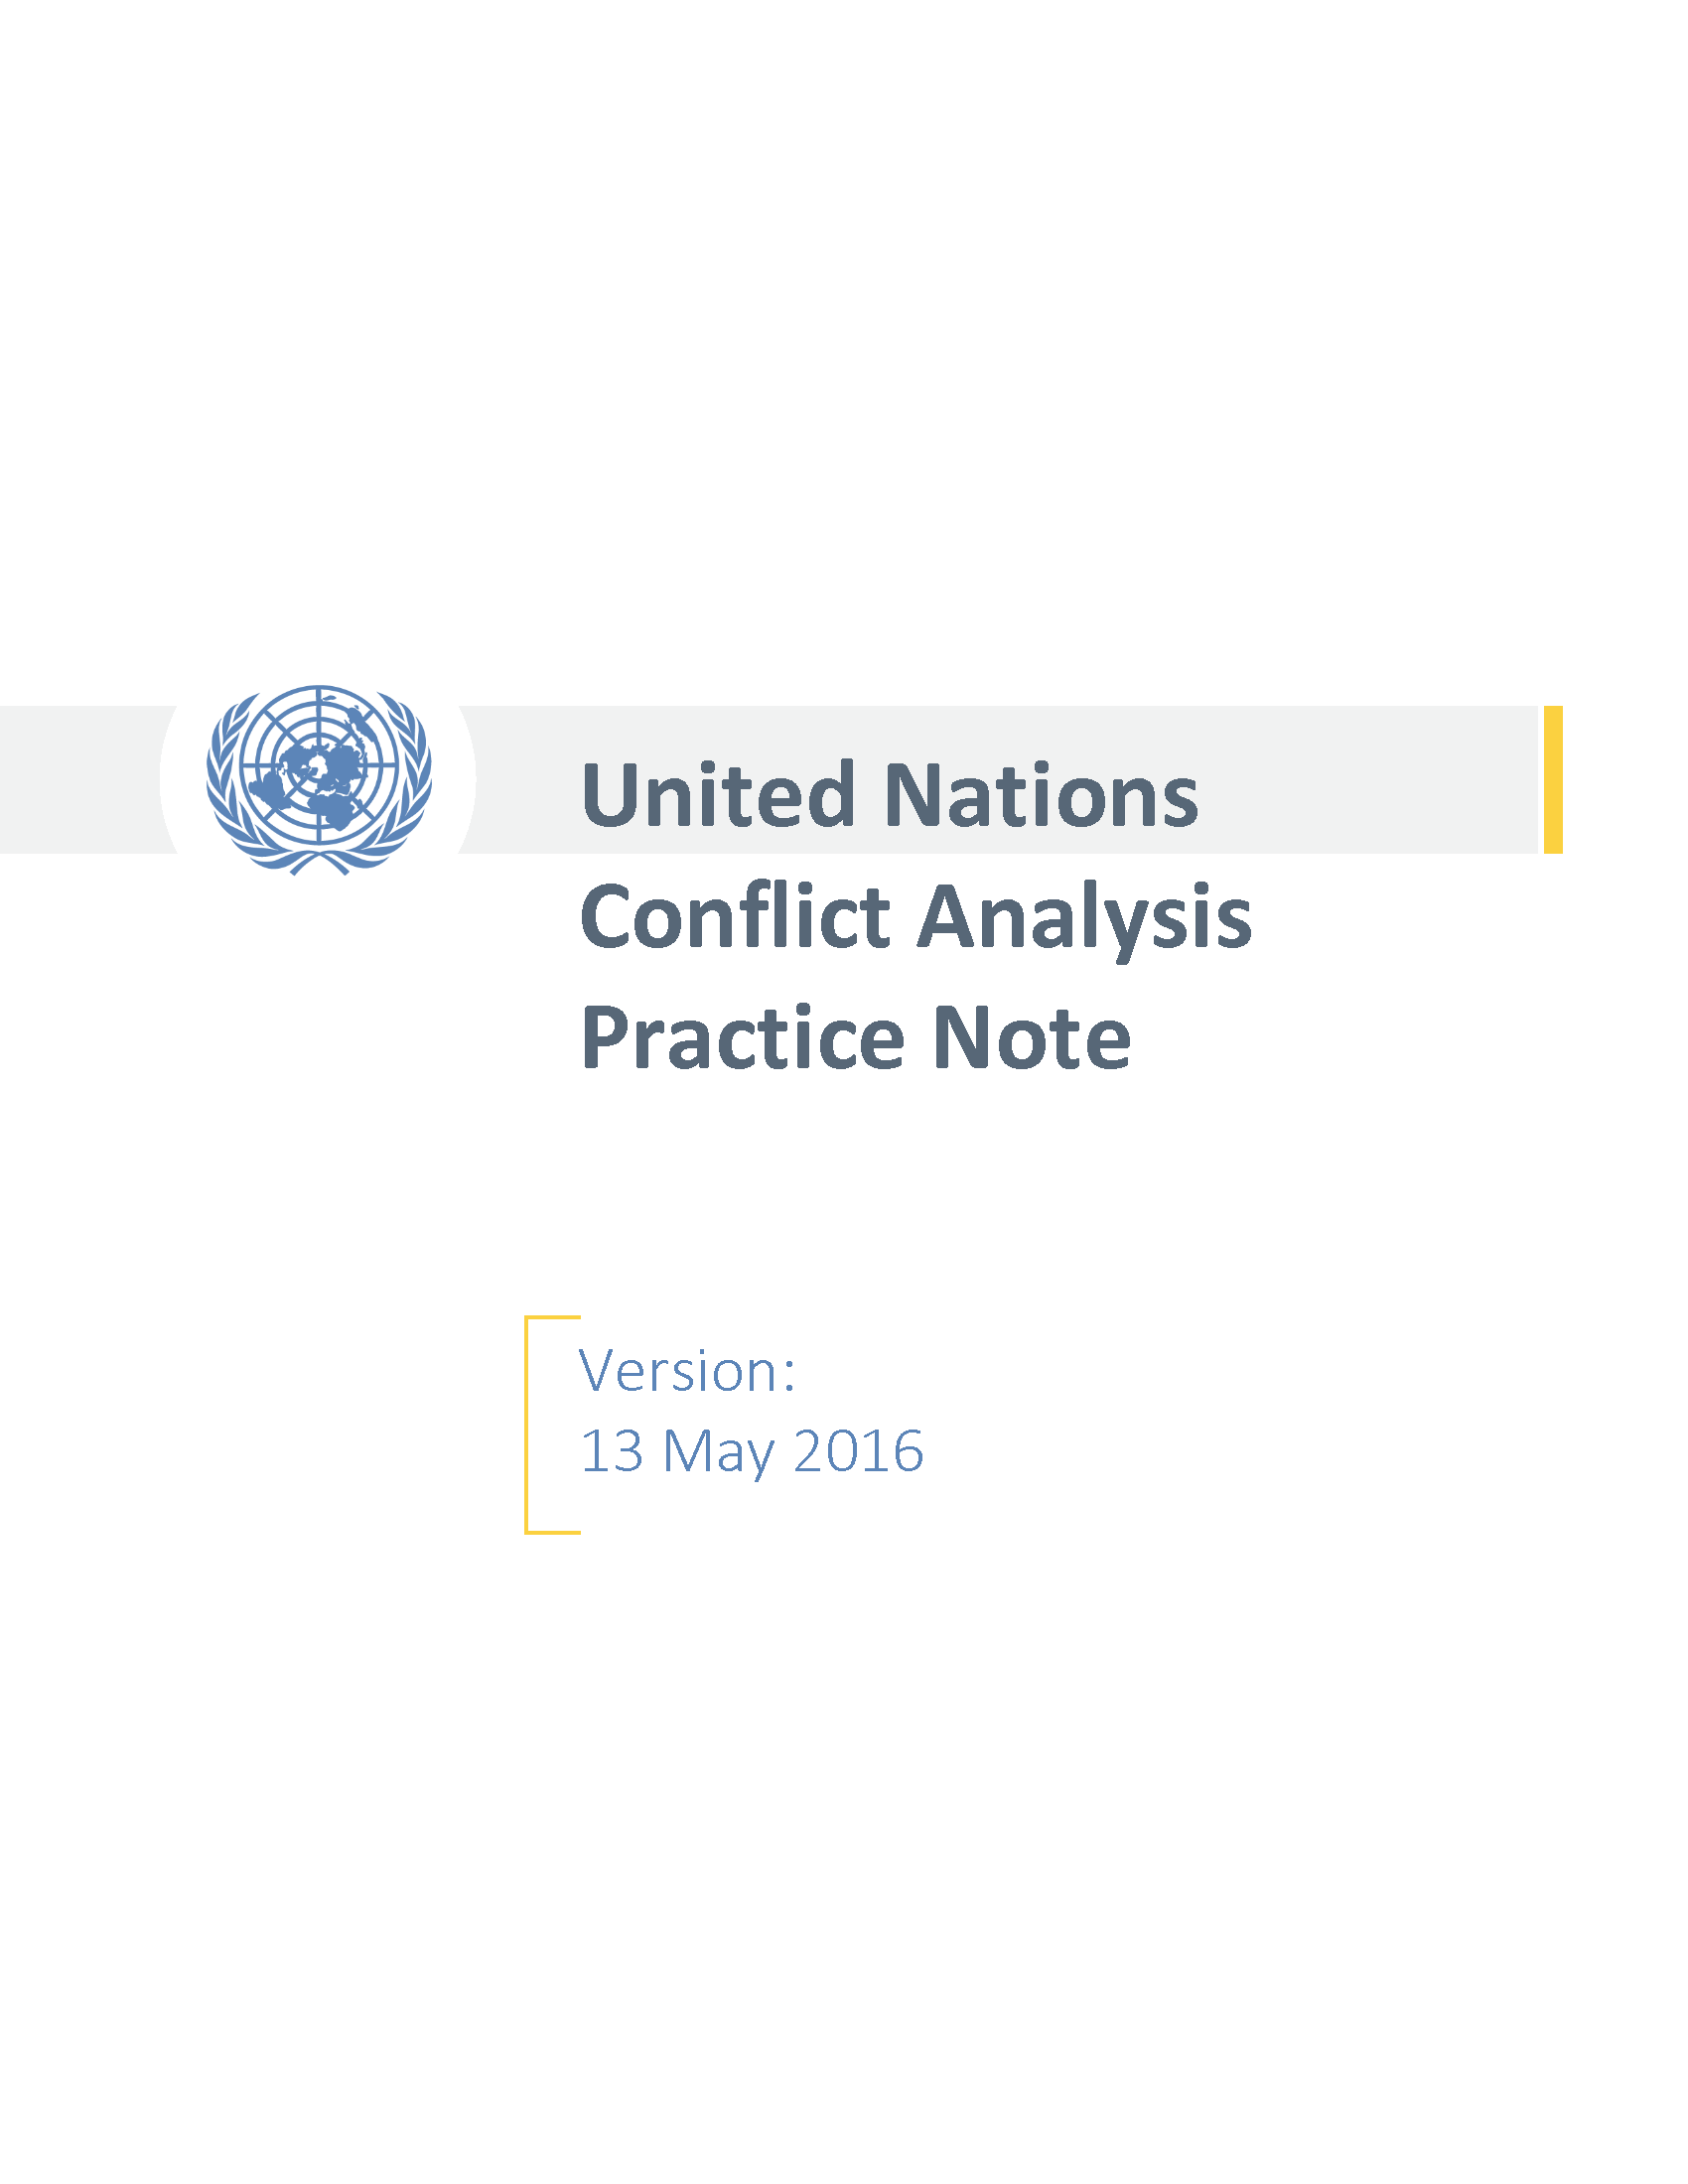 United Nations Conflict Analysis Practice Note